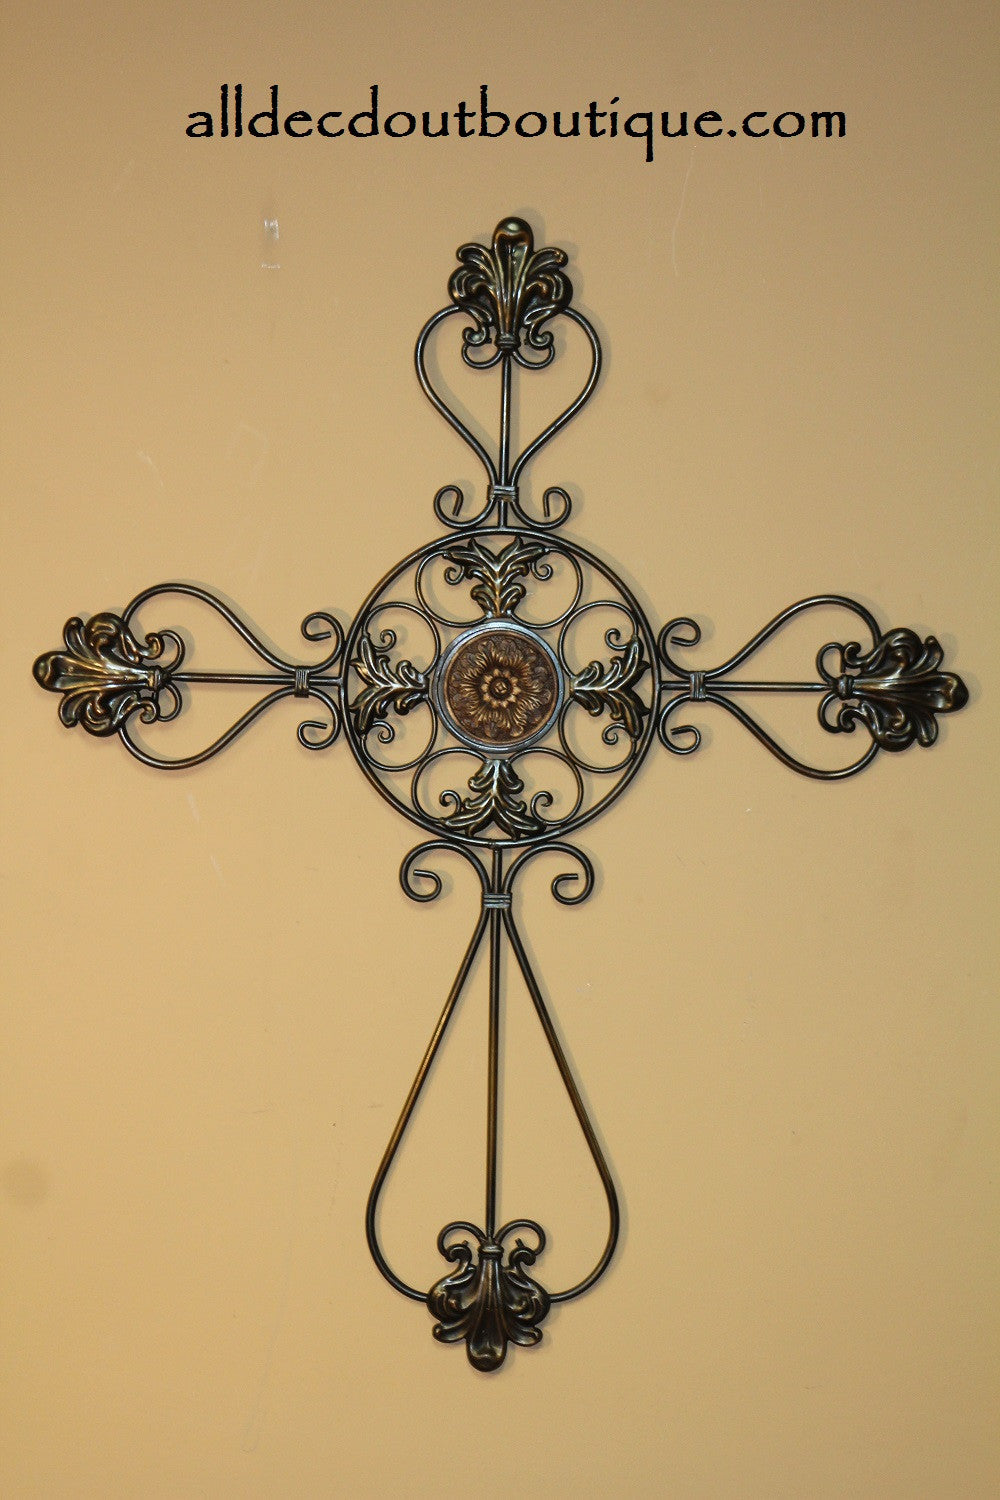 Wall Decor | Metal Hanging Cross - All Decd Out